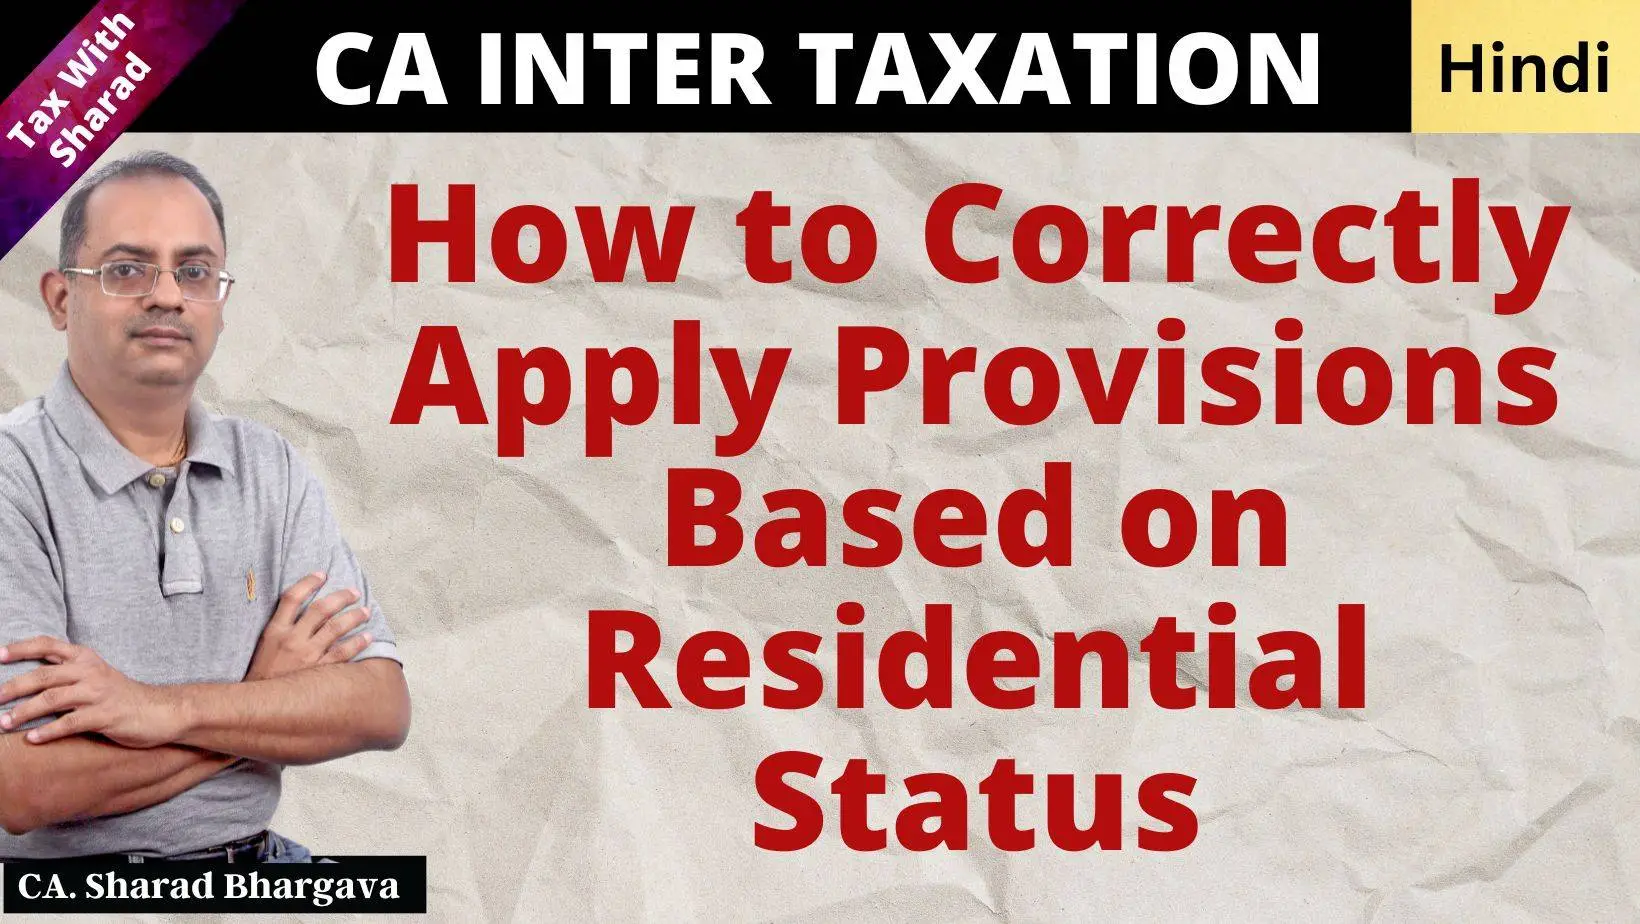 How to correctly apply provisions of Act based on residential status?